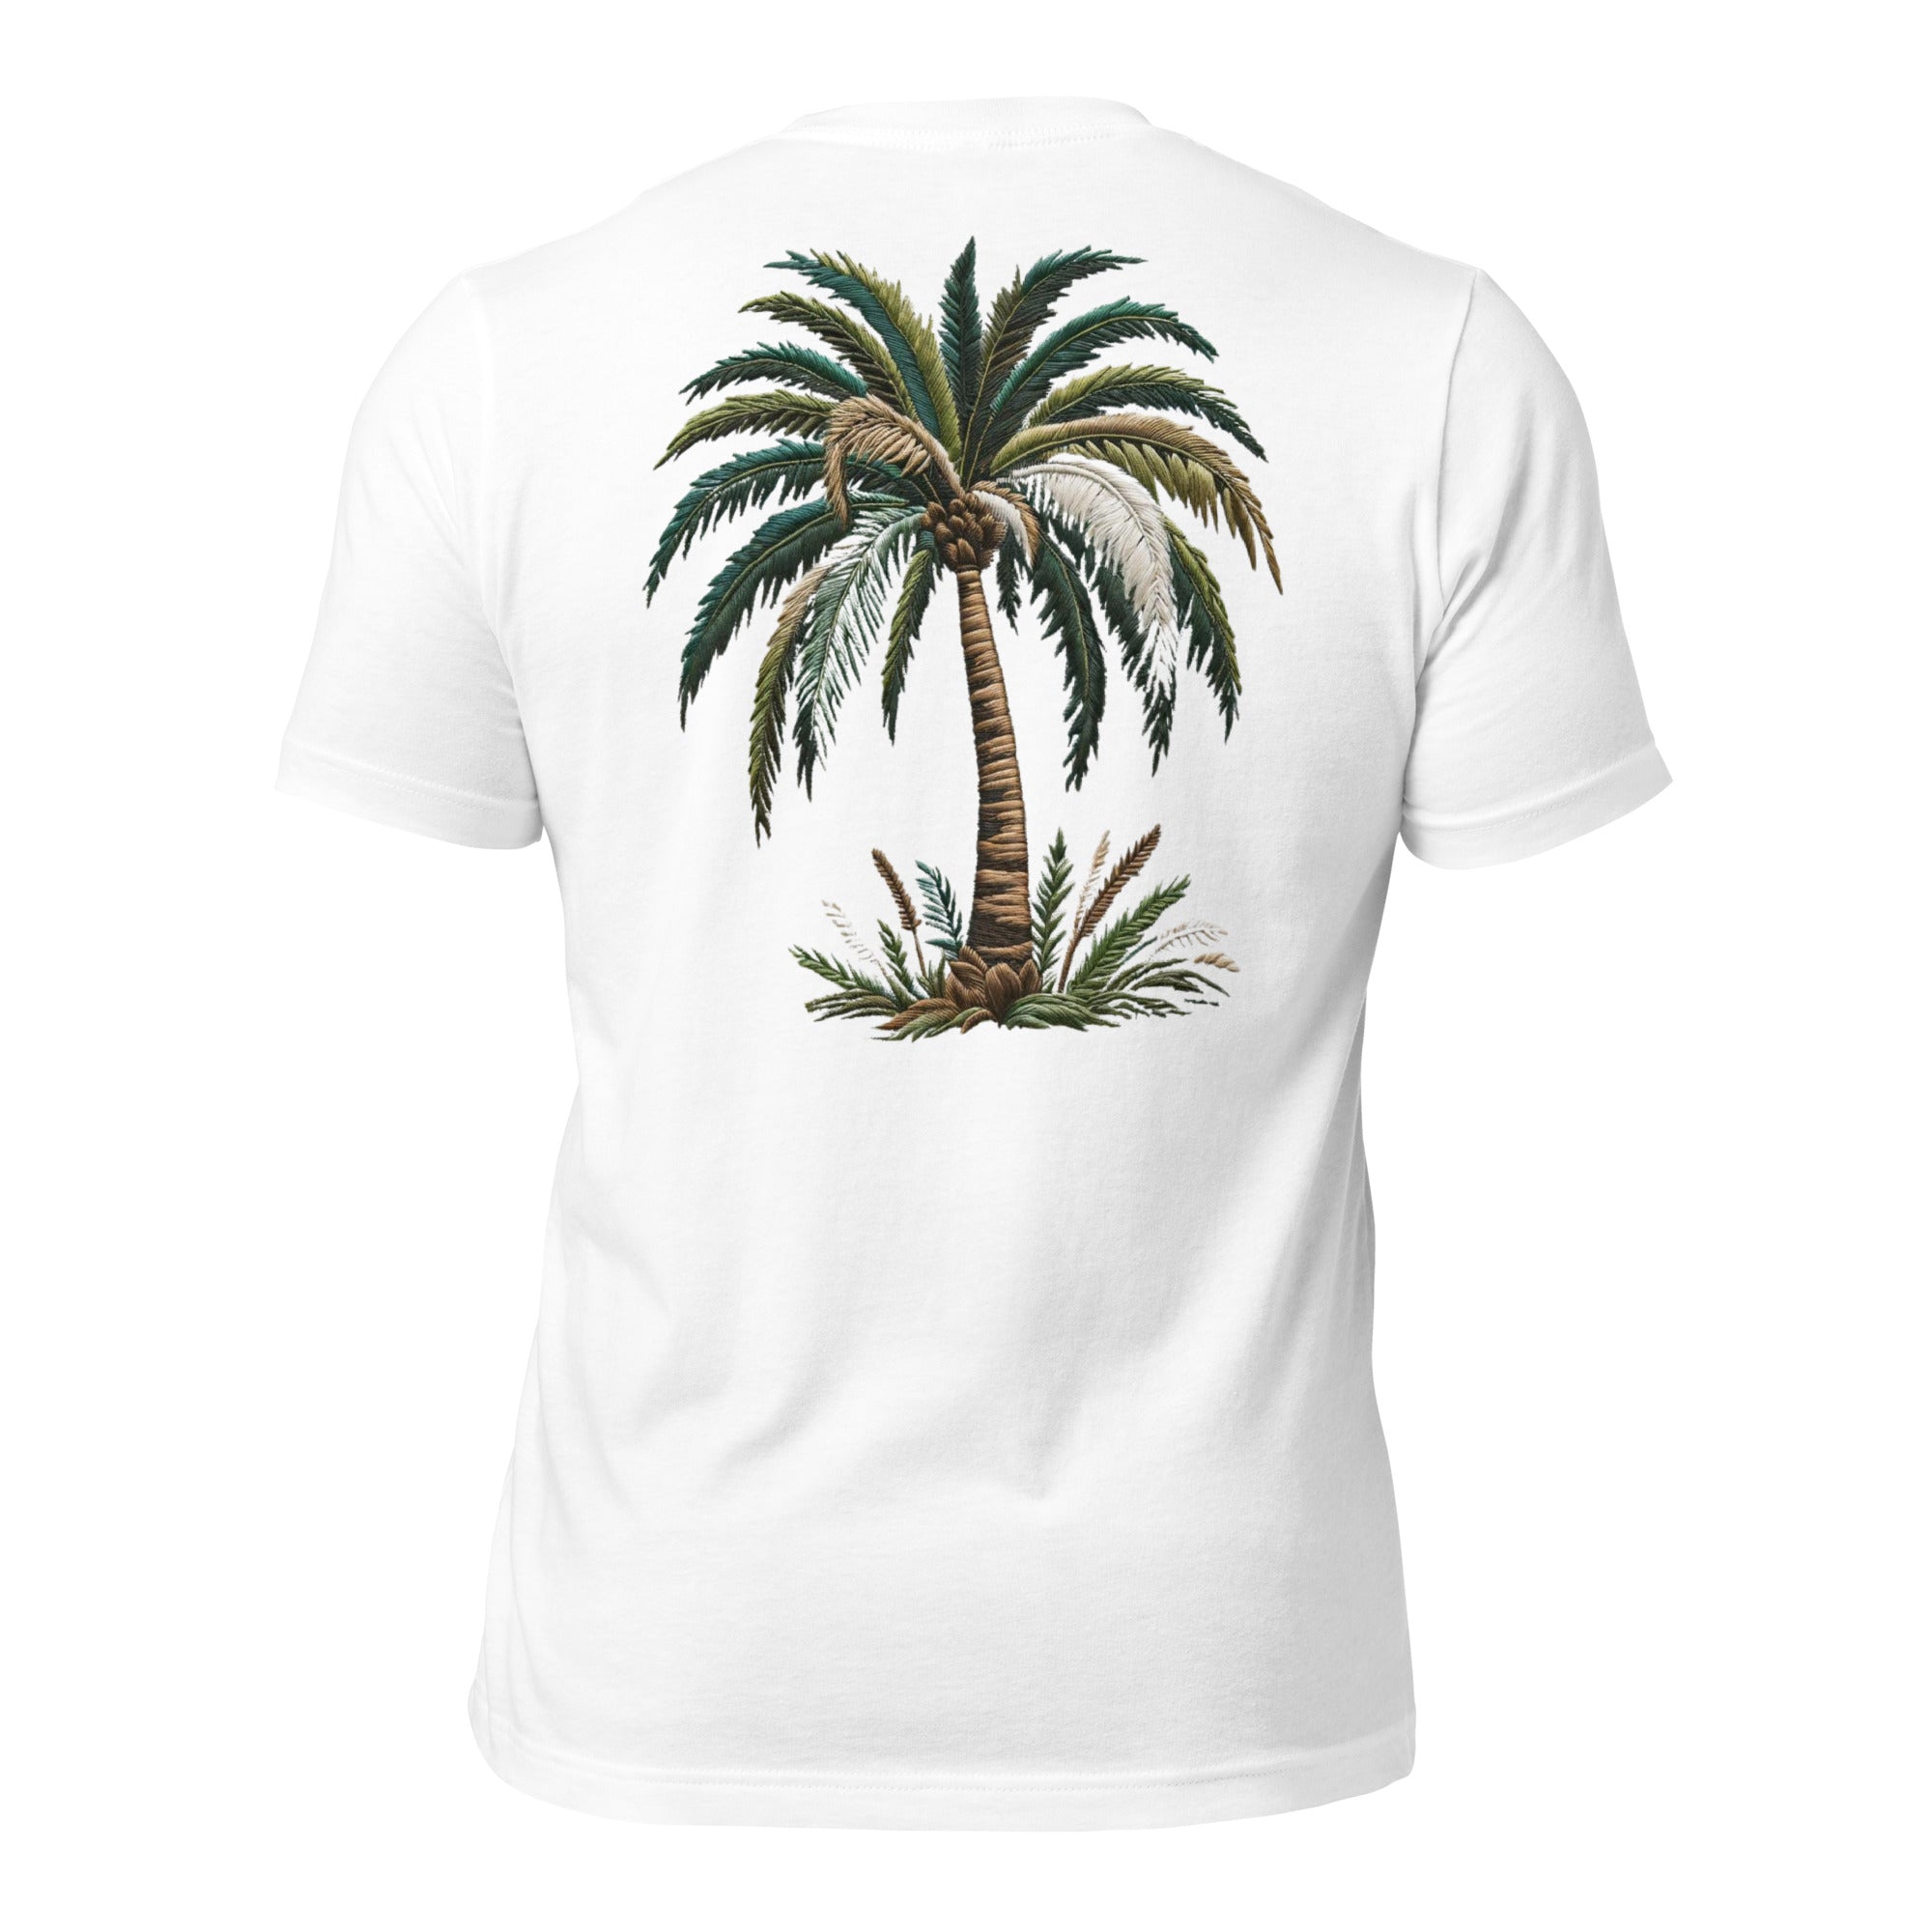 Sun-Kissed Style: Elevate Your Look with Lucas Islander's Palm Tree T-Shirt